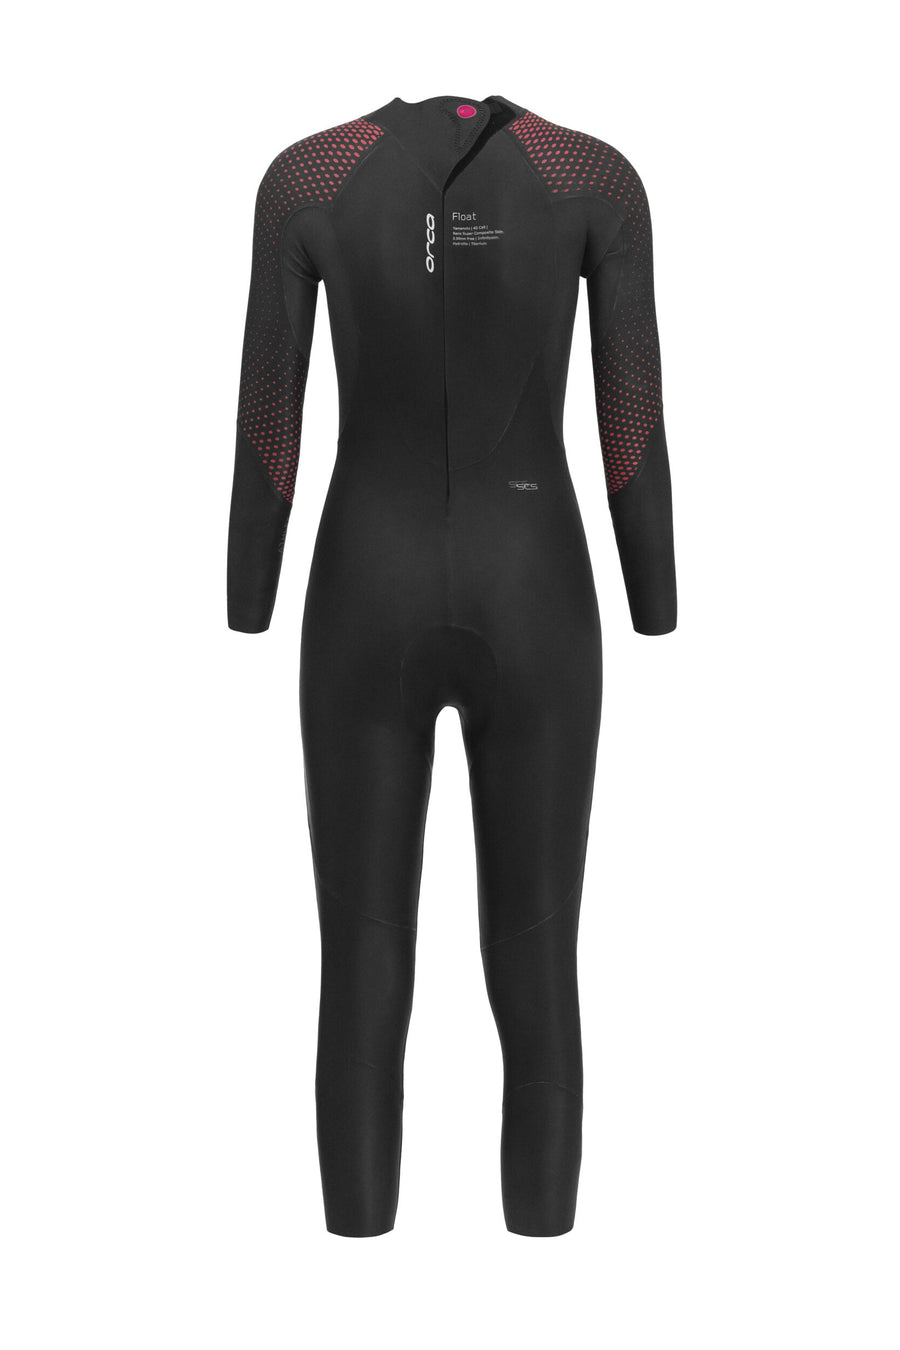 ORCA Athlex Float 2024 Wetsuit - Female (Formally the Orca S7)